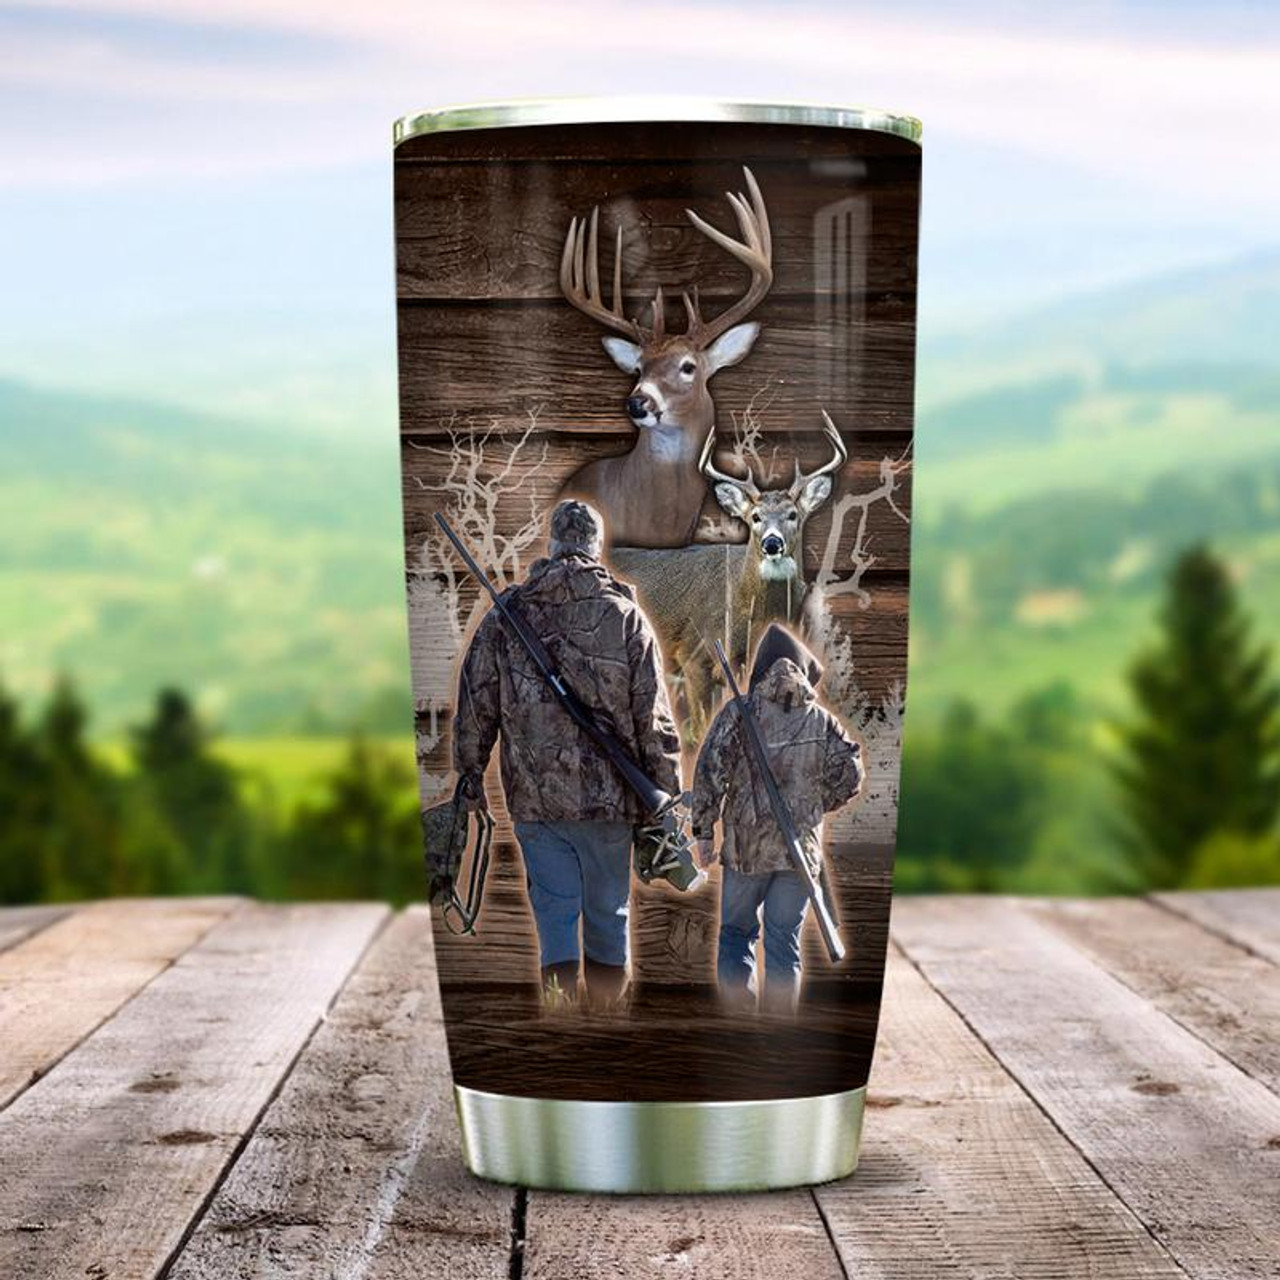 https://cdn11.bigcommerce.com/s-5qu22ar1ud/images/stencil/1280x1280/products/13289/39356/1621252208220-Deer-Hunting-Dad-With-His-Son-KD2-ABLZ1705003Z-Stainless-Steel-Tumbler-mk3_800x__38159.1622705150.jpg?c=1?imbypass=on